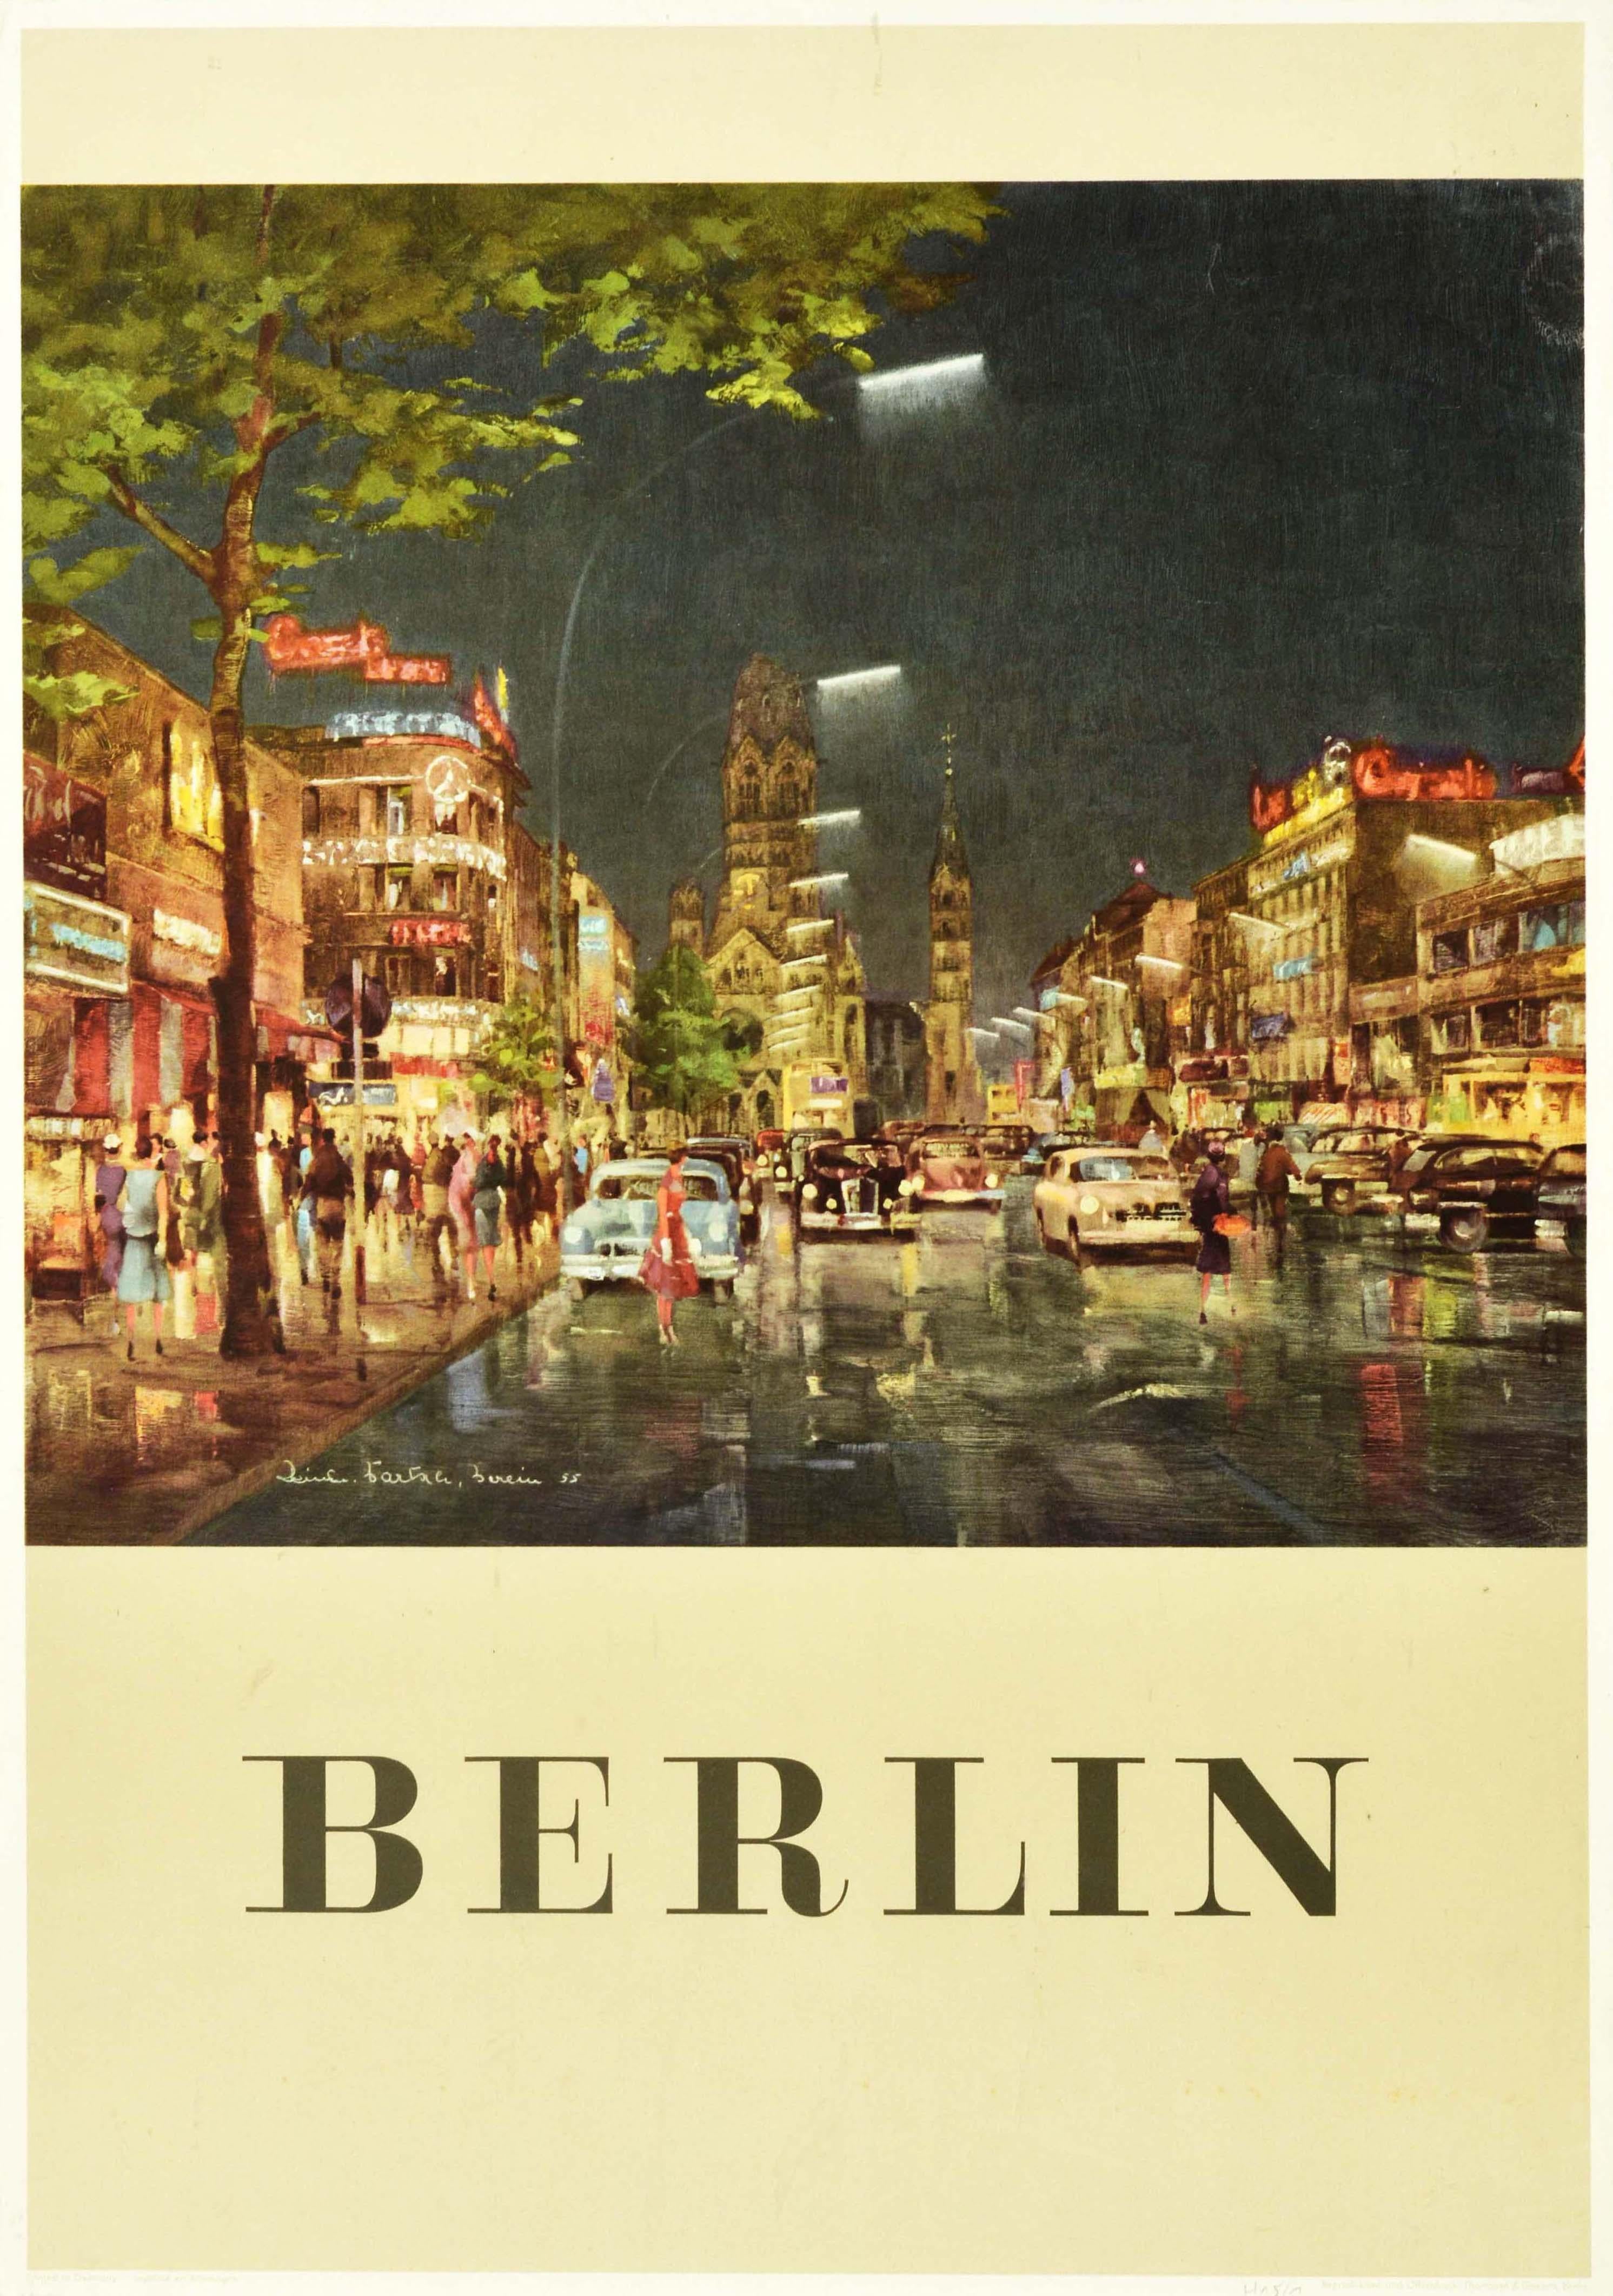 TRAVEL TOURISM BERLIN GERMANY LARGE POSTER ART PRINT BB2840A 